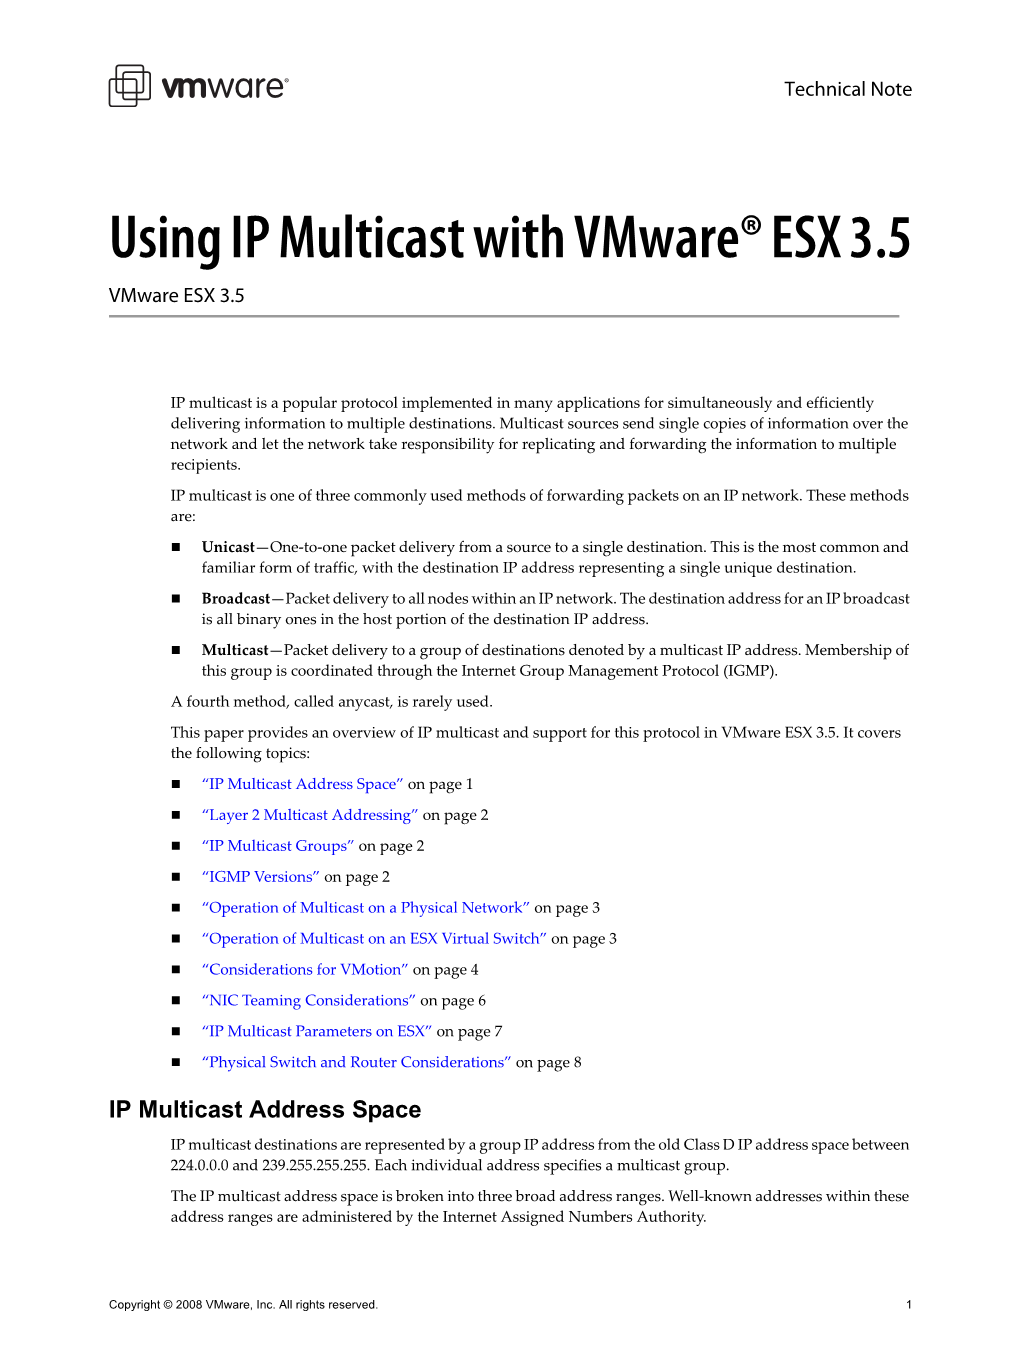 Using IP Multicast with Vmware ESX